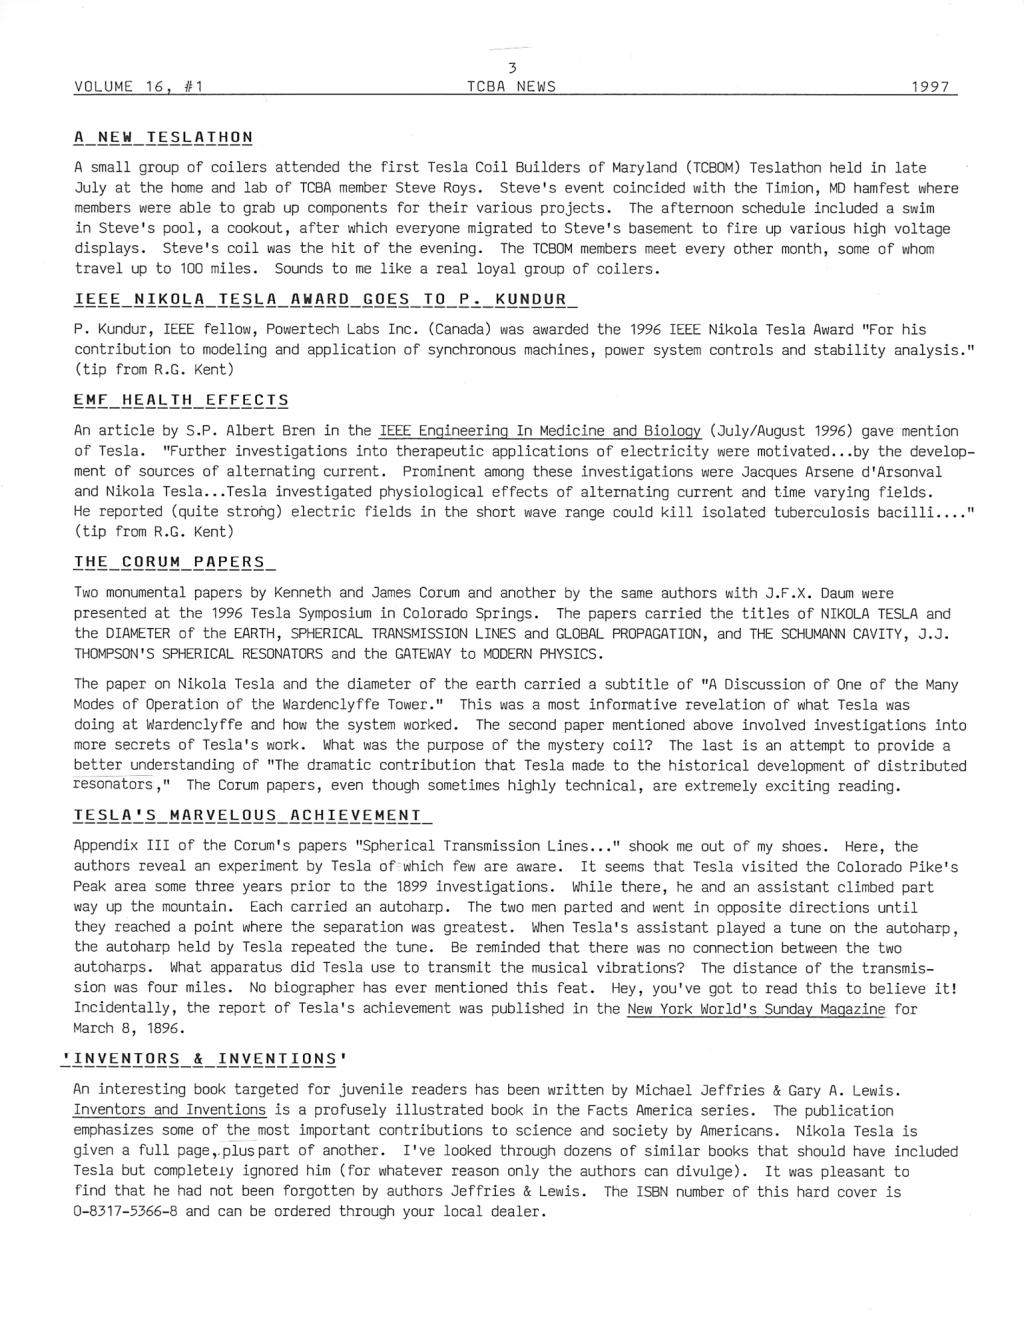 TCBA Volume 16 - Issue 1 - Page 3 of 18